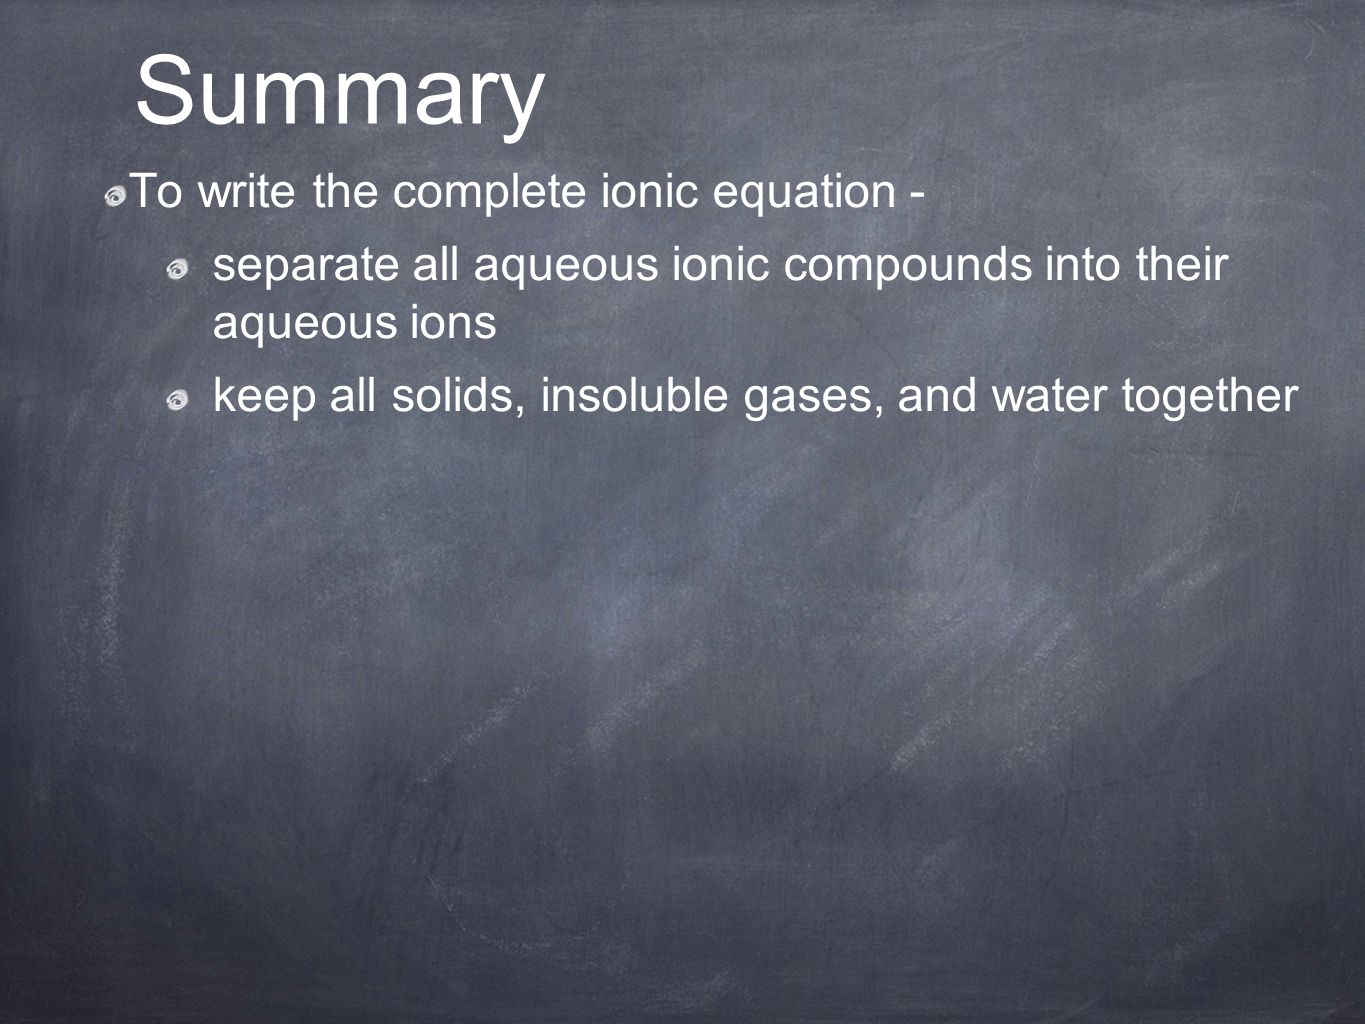 To write the complete ionic equation - separate all aqueous ionic compounds into their aqueous ions keep all solids, insoluble gases, and water together Summary